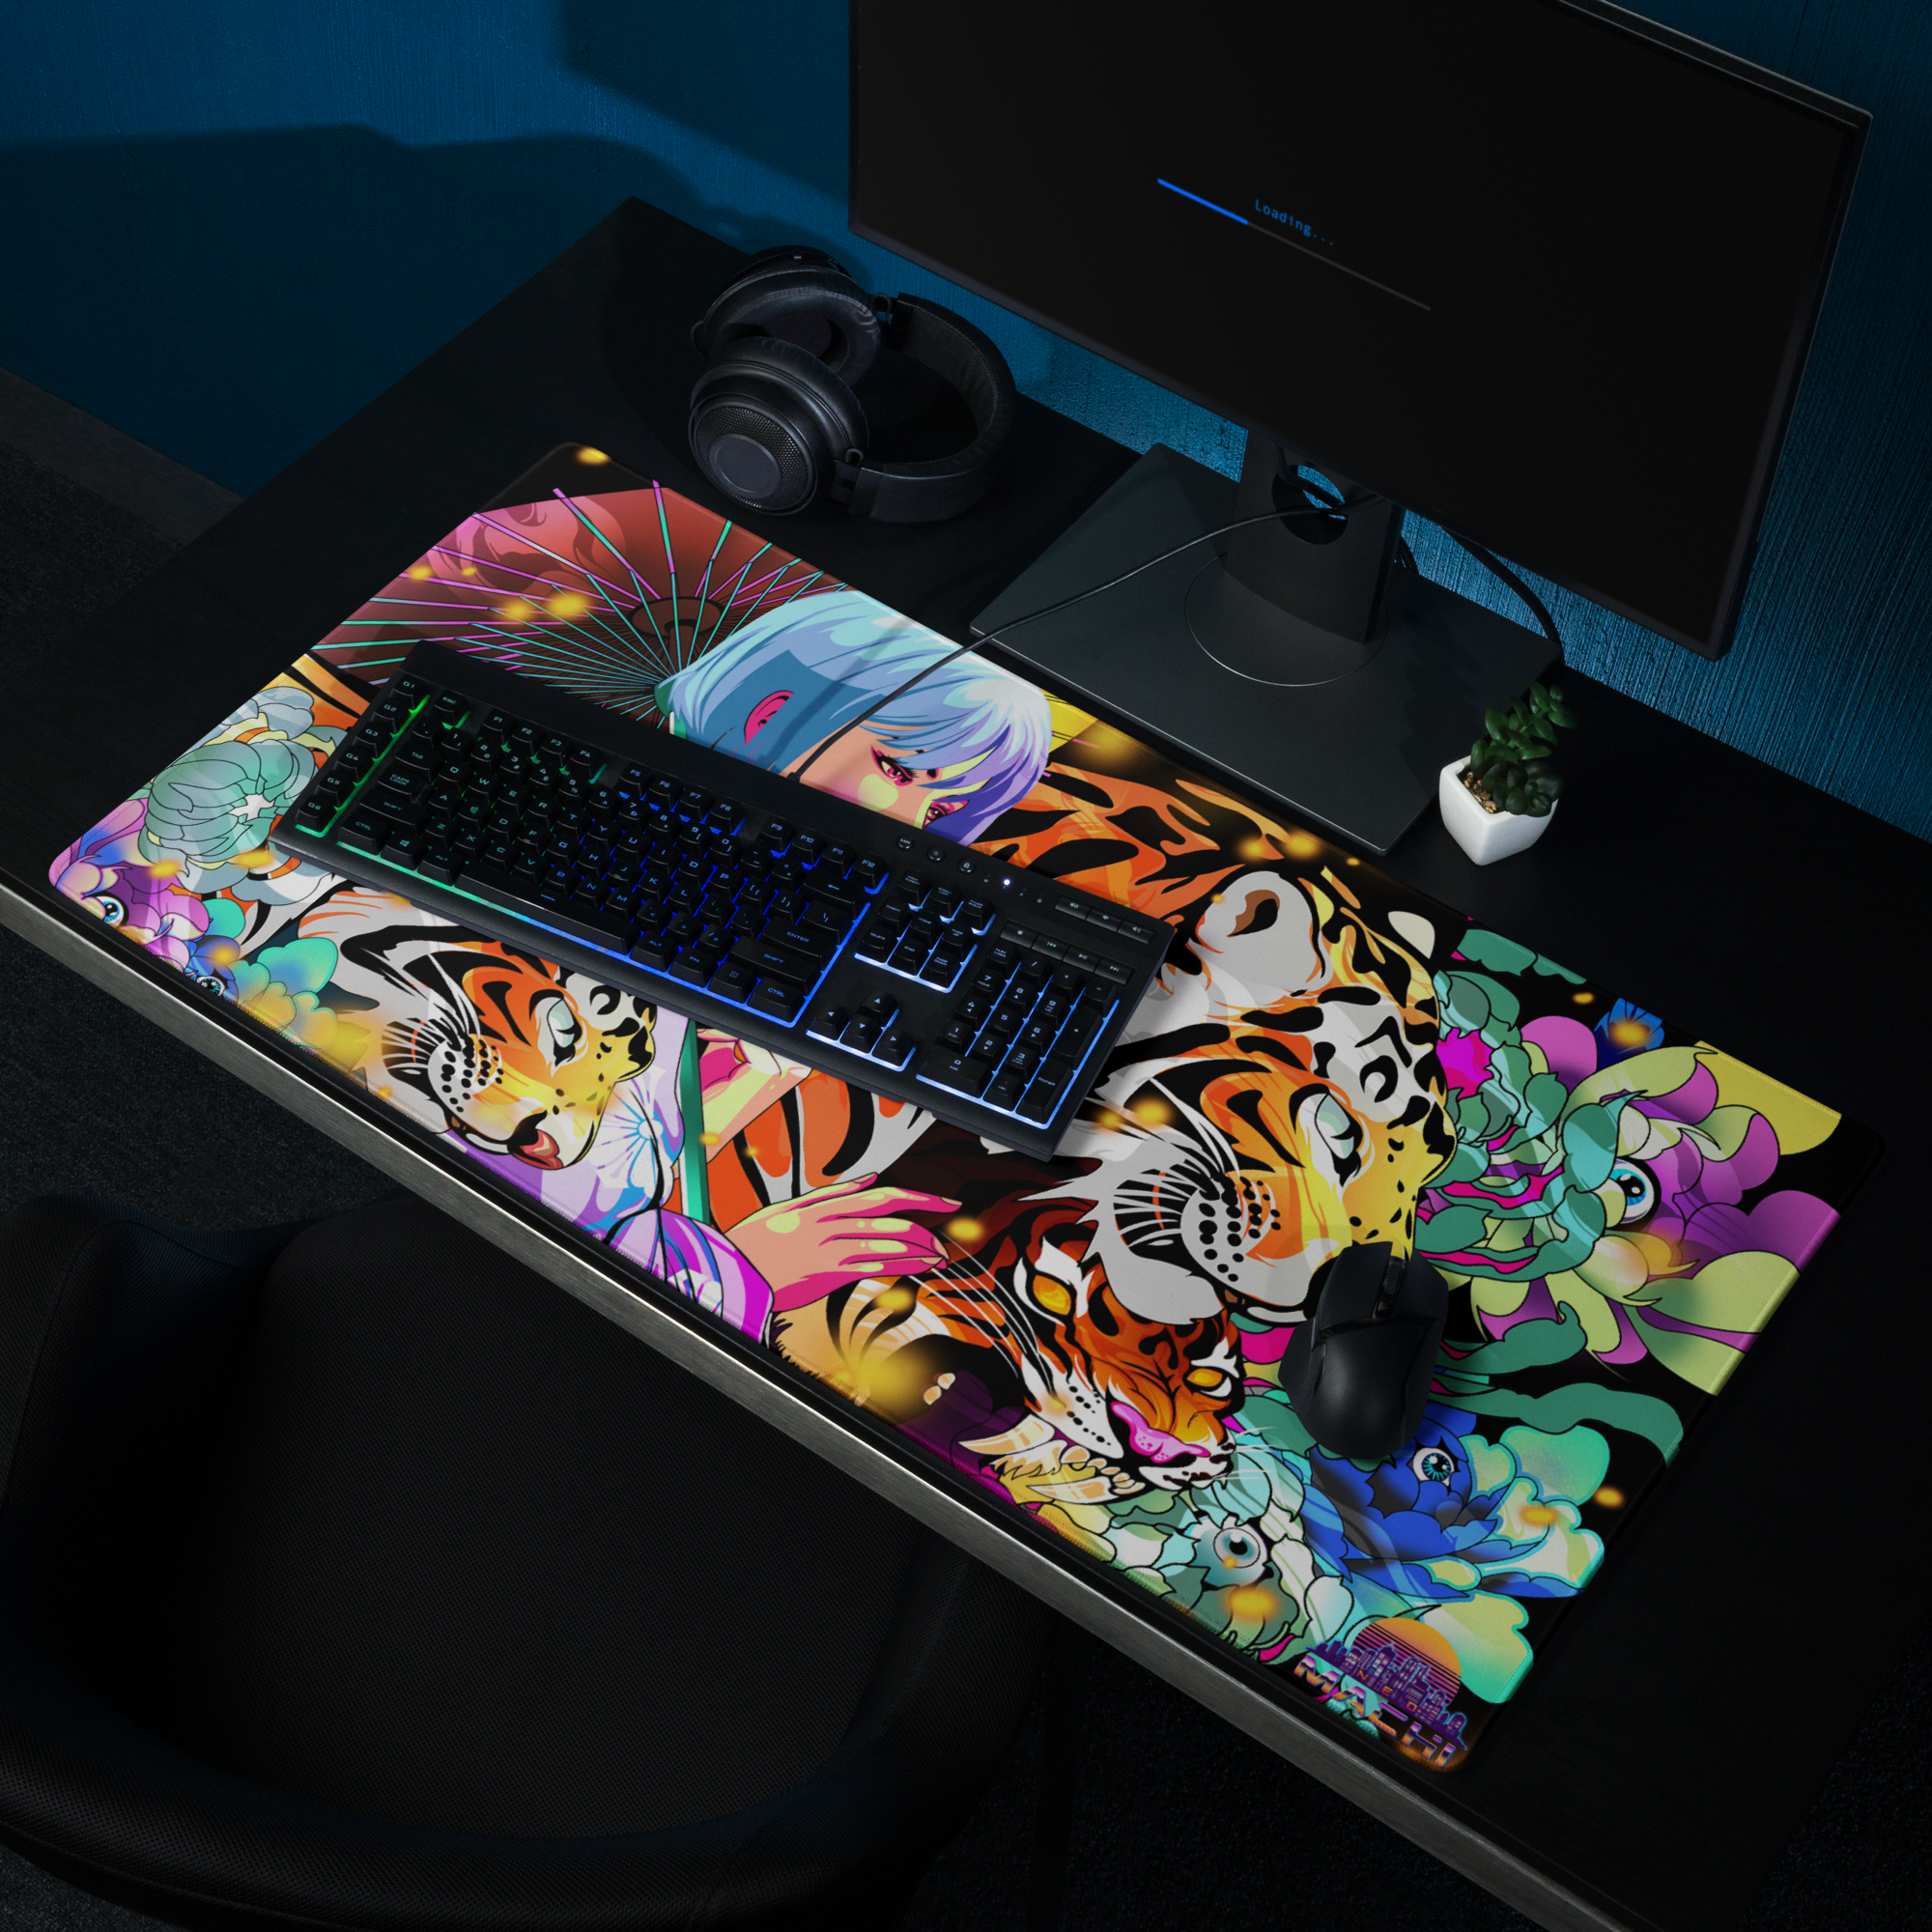 GAMING MOUSE PADS